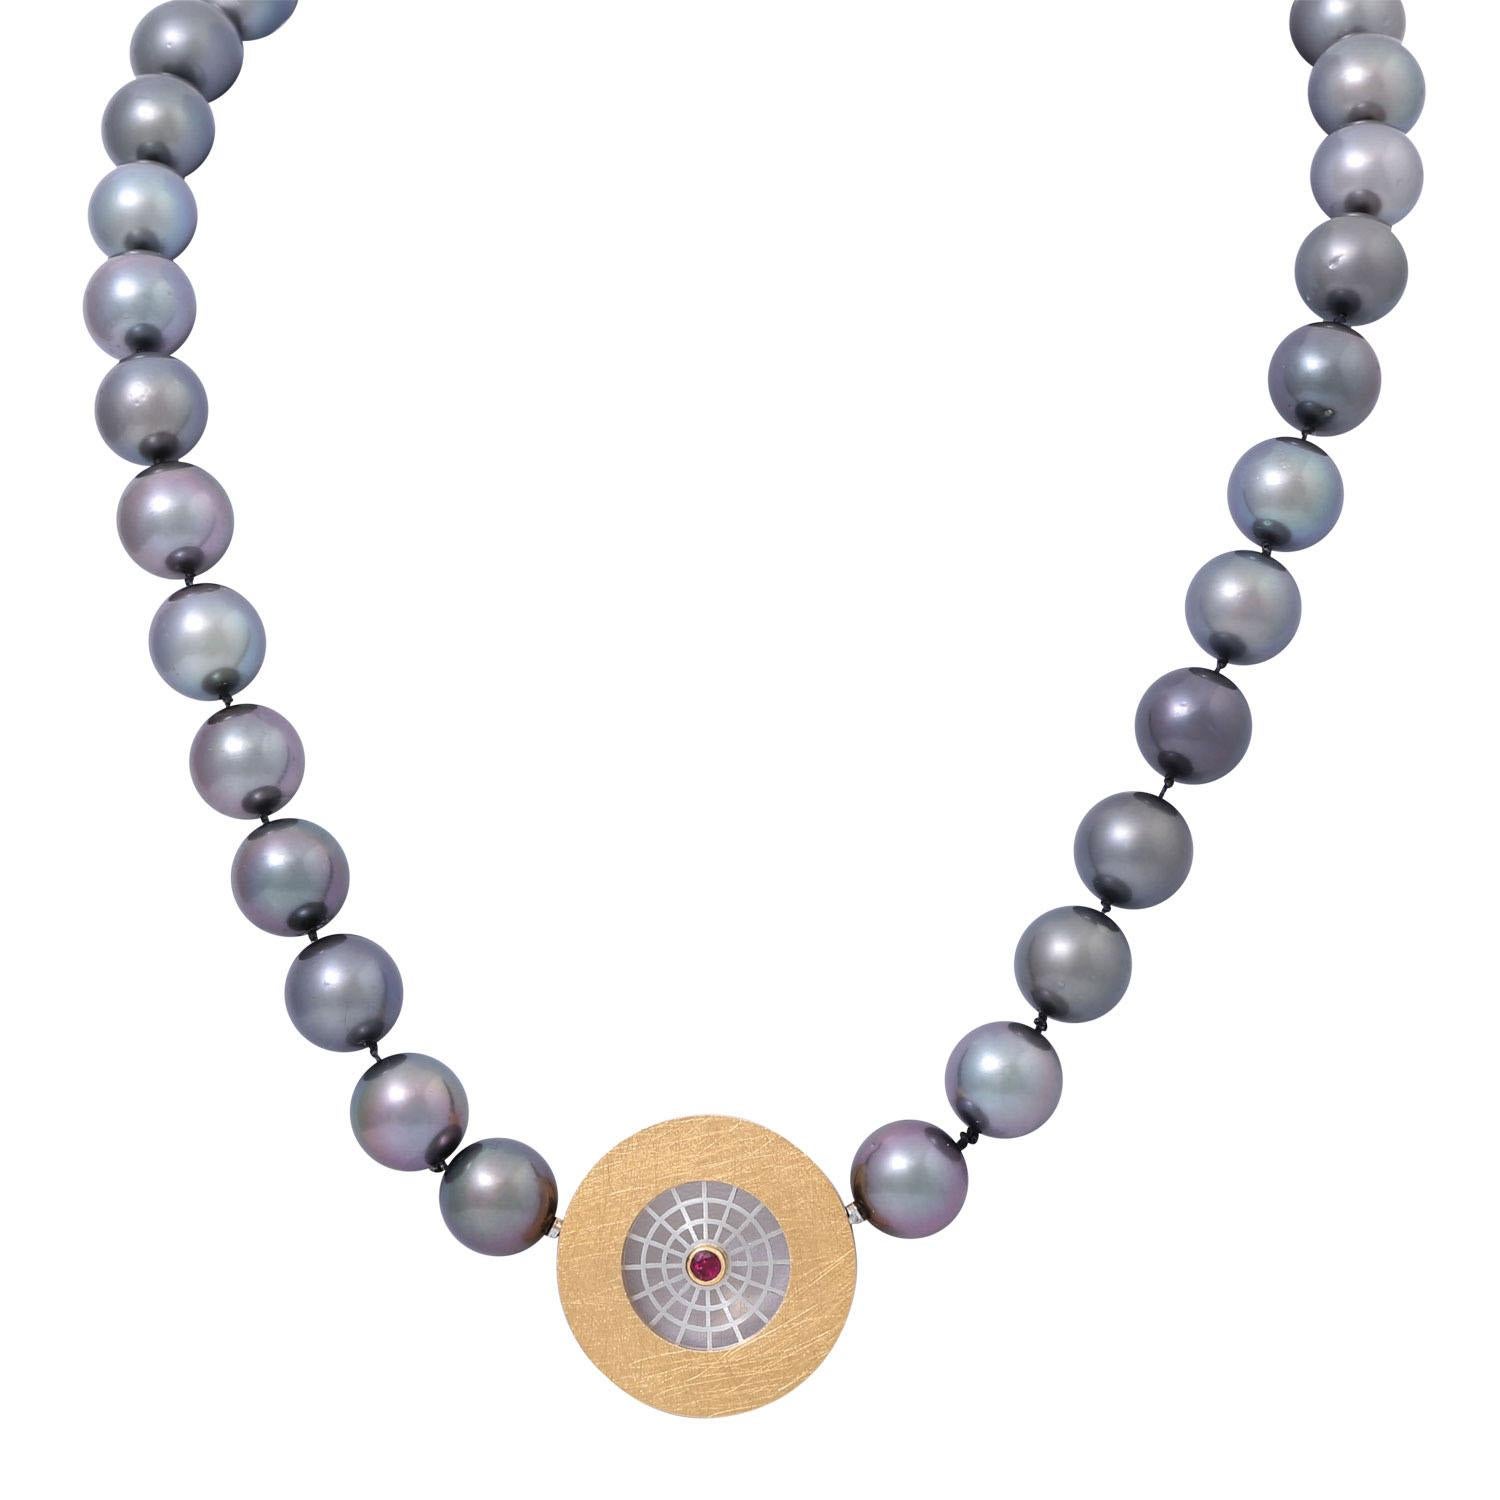 slation results 35 gray-dark gray Tahitian cultured pearls, beautiful luster, some with WMM, D: from 11.9 to 13.6 mm, on a beautiful interchangeable clasp that can be worn on both sides with a spider web pattern in the middle, set with 1